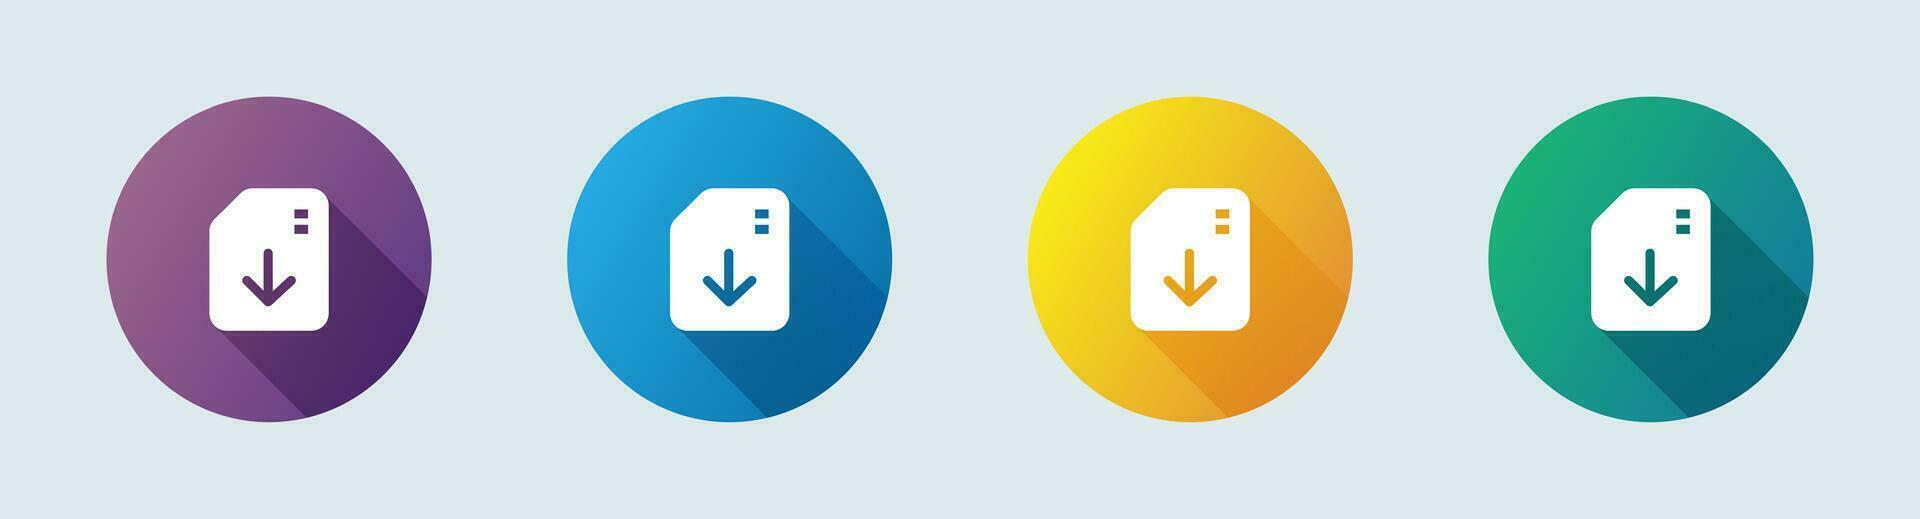 Import solid icon in flat design style. Download signs vector illustration.